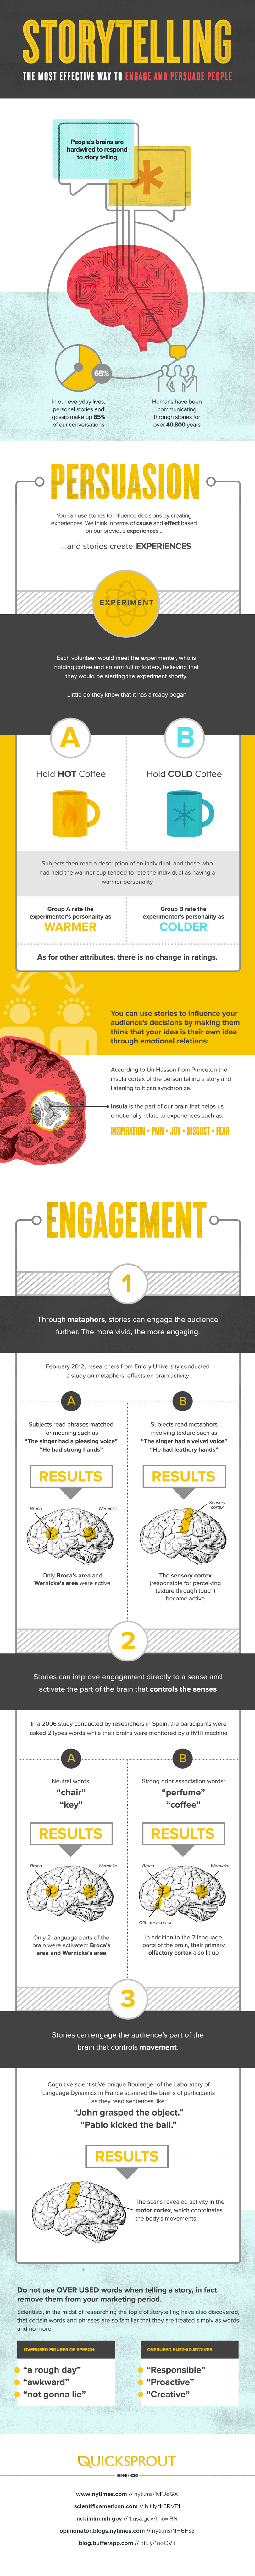 Storytelling: The Most Effective Way to Engage and Persuade People